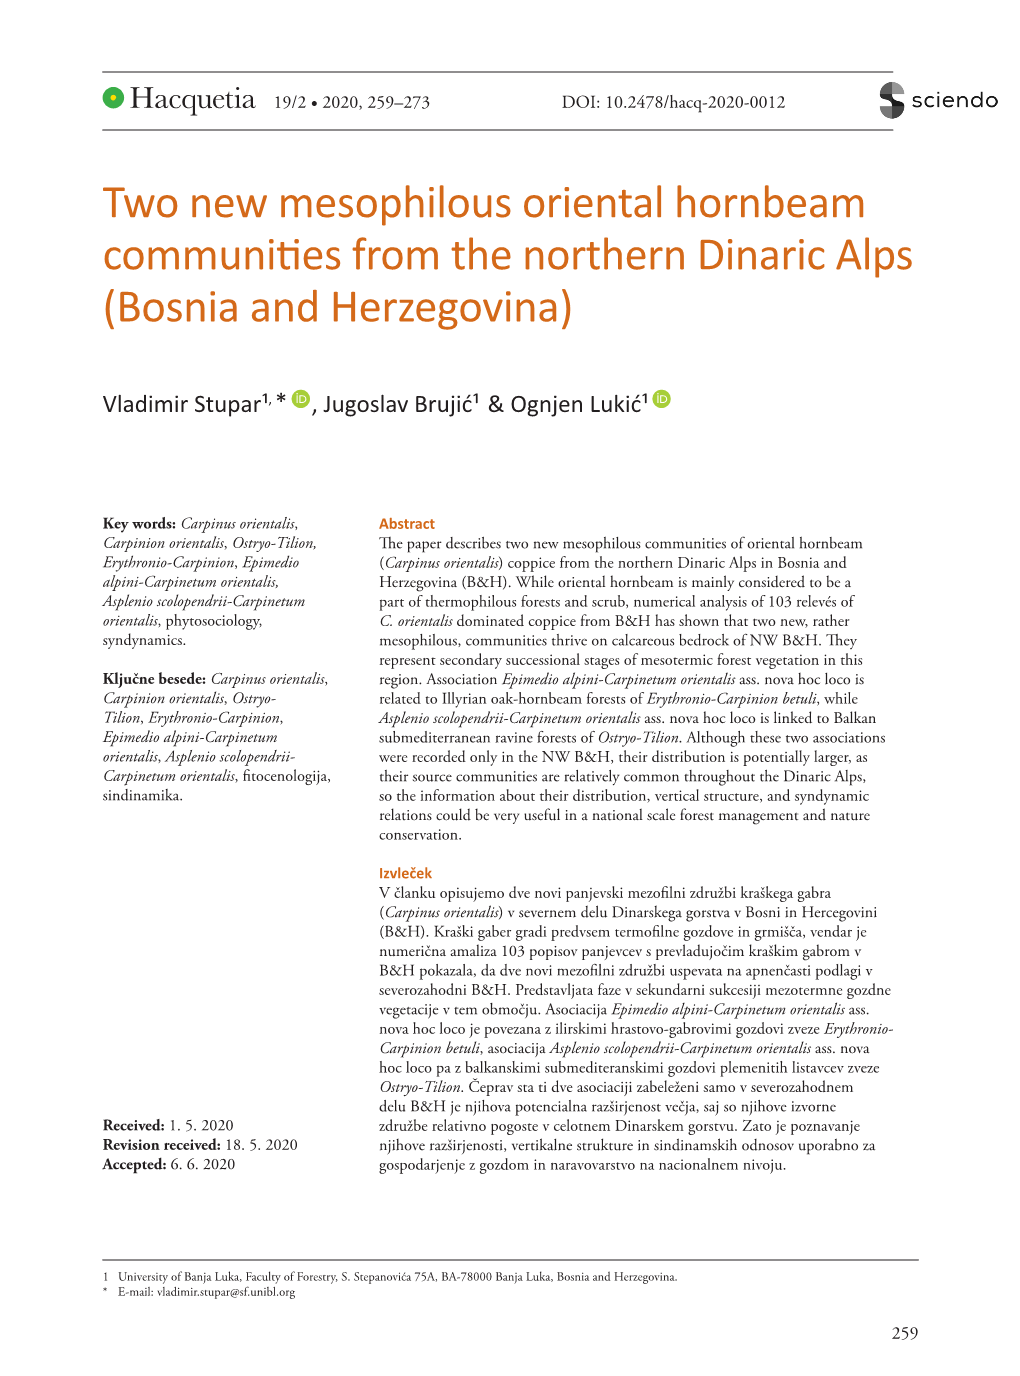 Two New Mesophilous Oriental Hornbeam Communities from the Northern Dinaric Alps (Bosnia and Herzegovina)